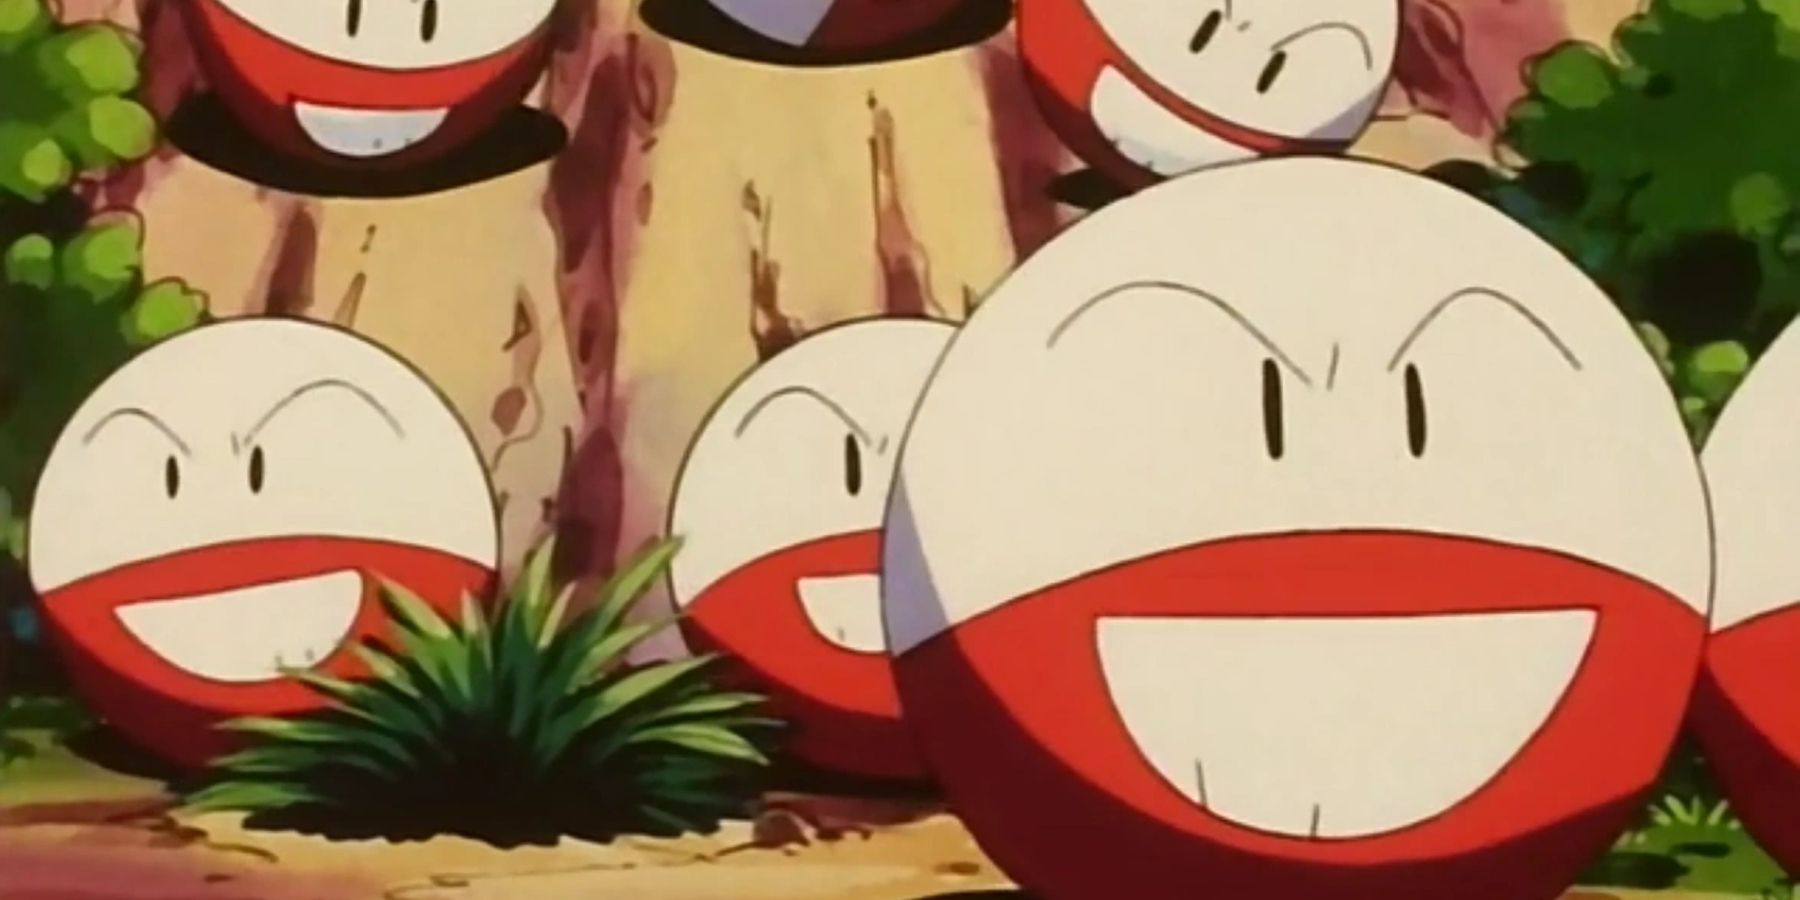 I just made Voltorb/ Electrode of every pokeball types : r/pokemon